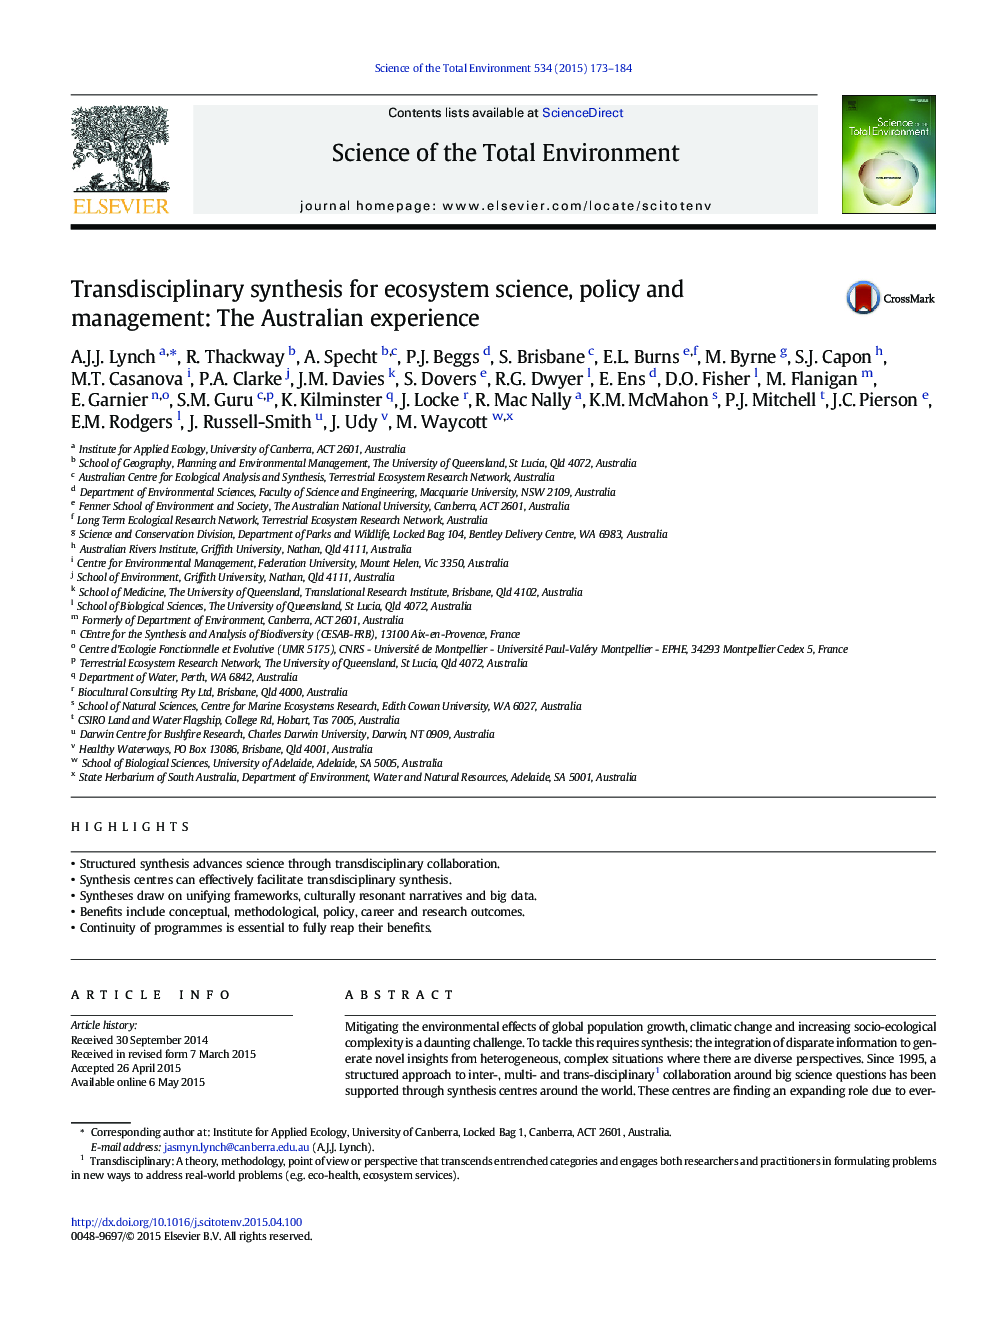 Transdisciplinary synthesis for ecosystem science, policy and management: The Australian experience